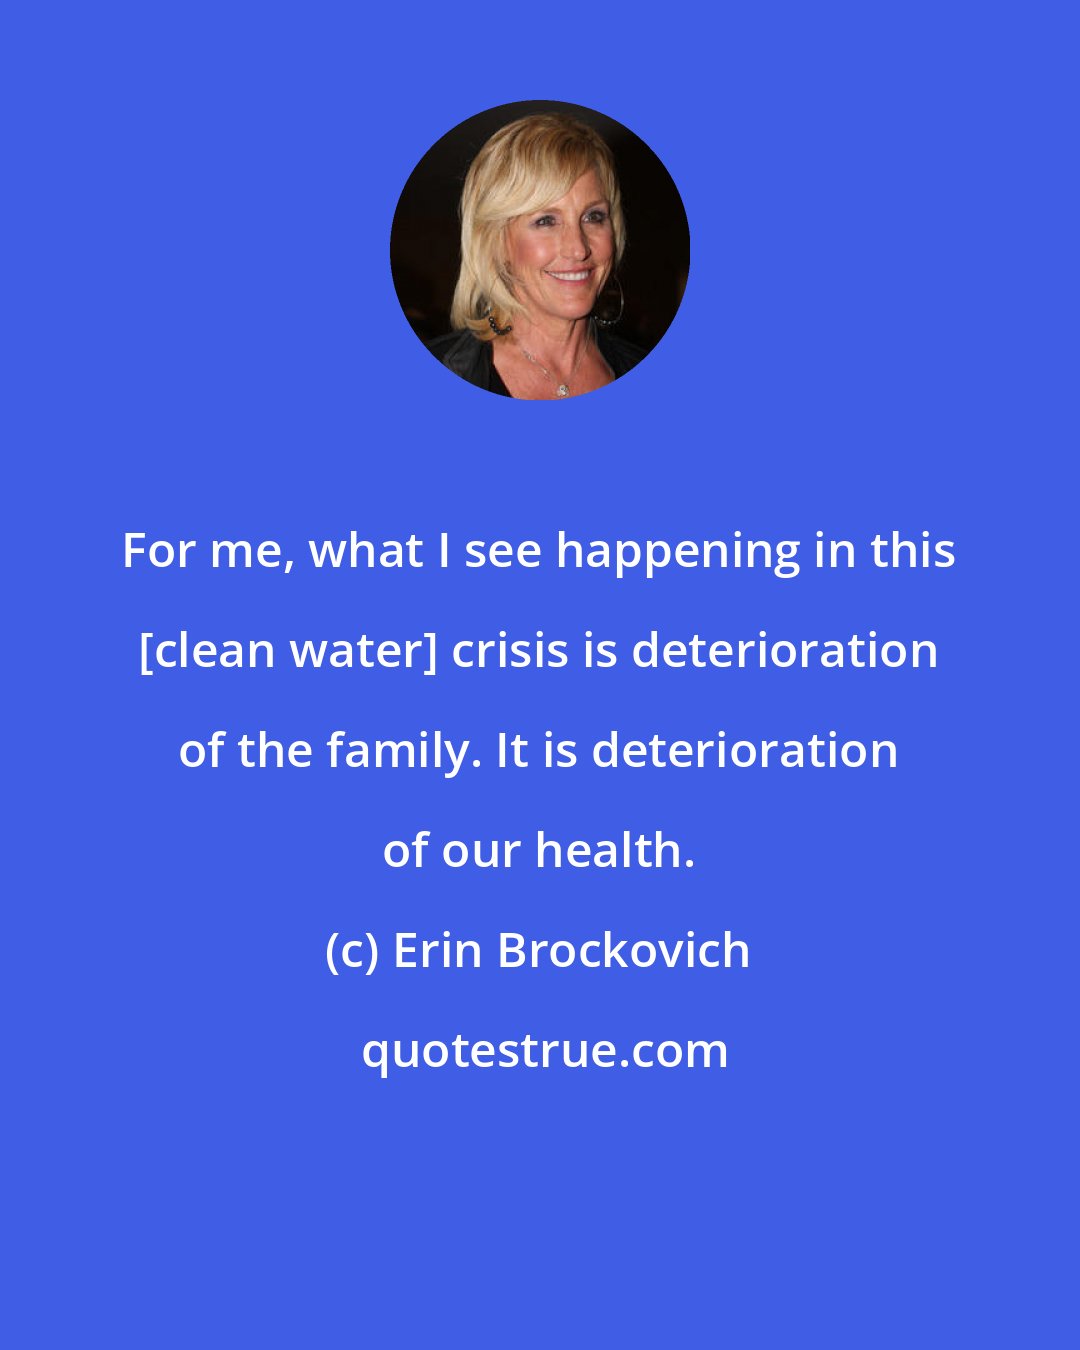 Erin Brockovich: For me, what I see happening in this [clean water] crisis is deterioration of the family. It is deterioration of our health.